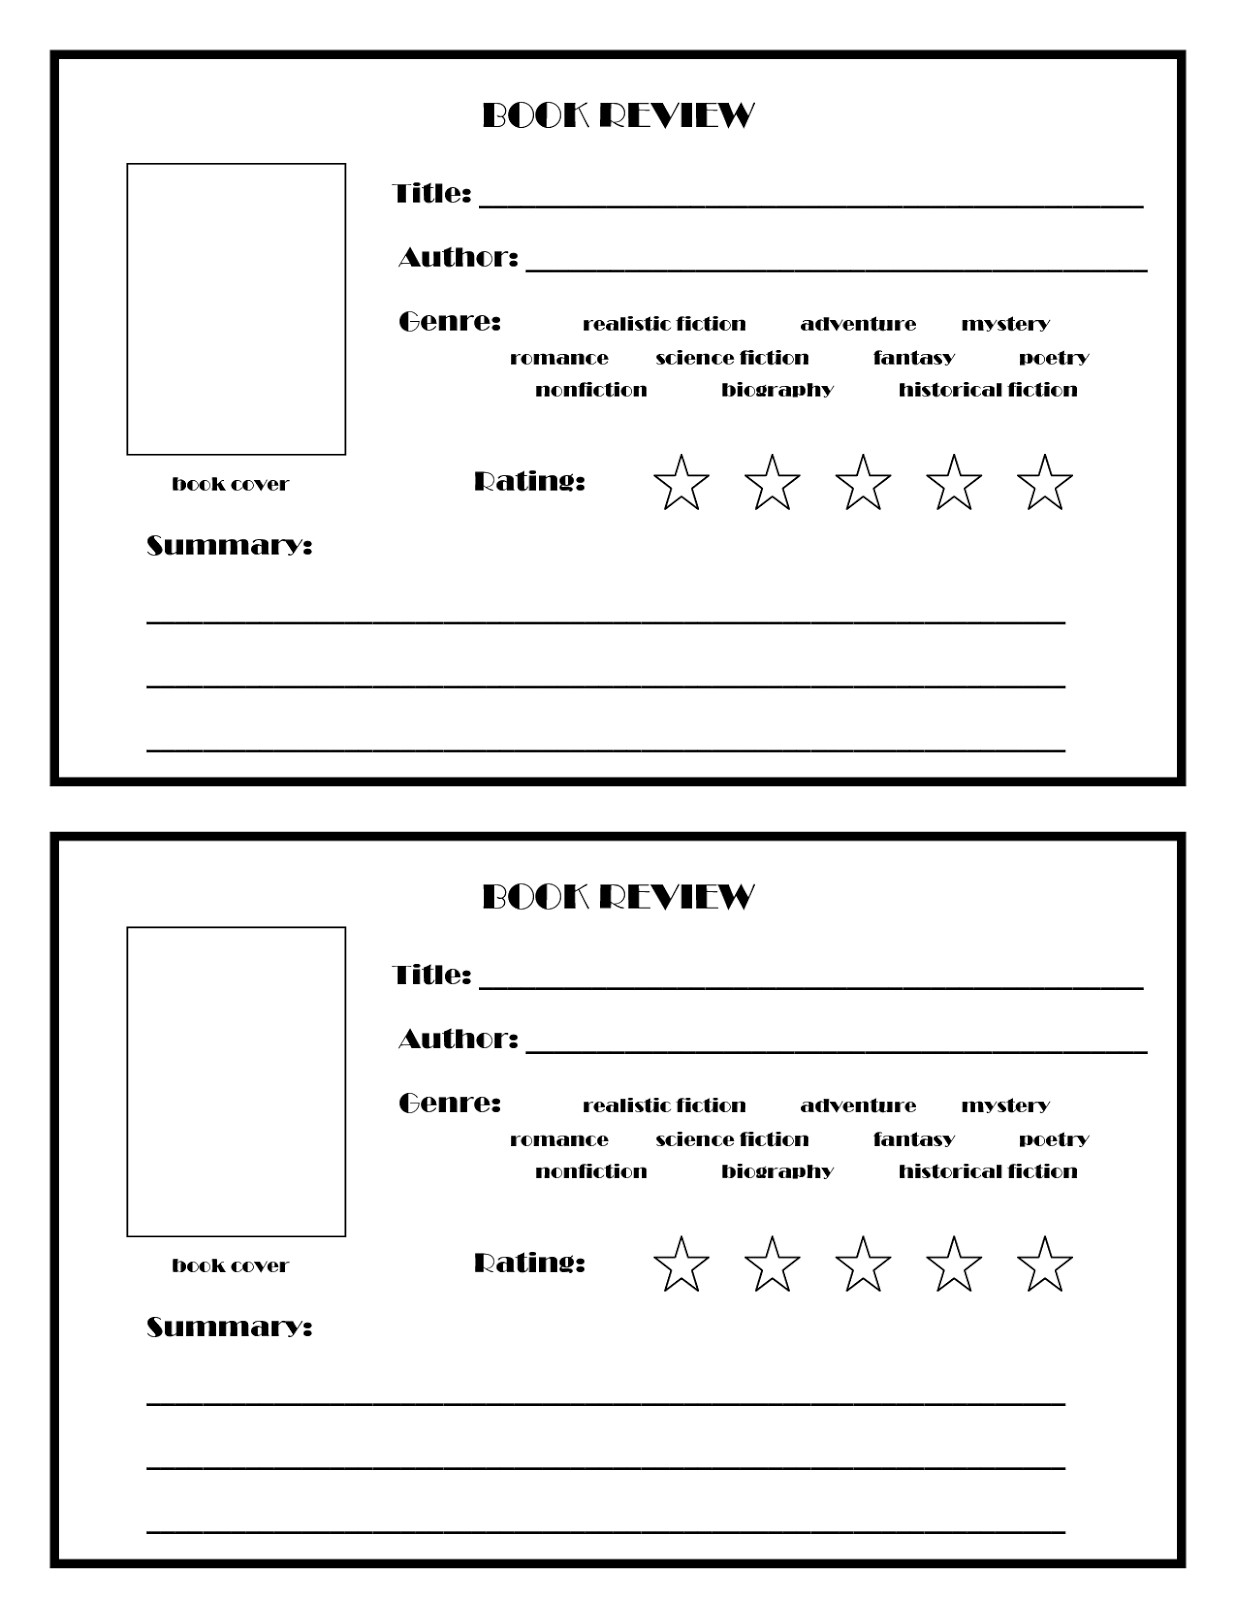 Book Review Template Free